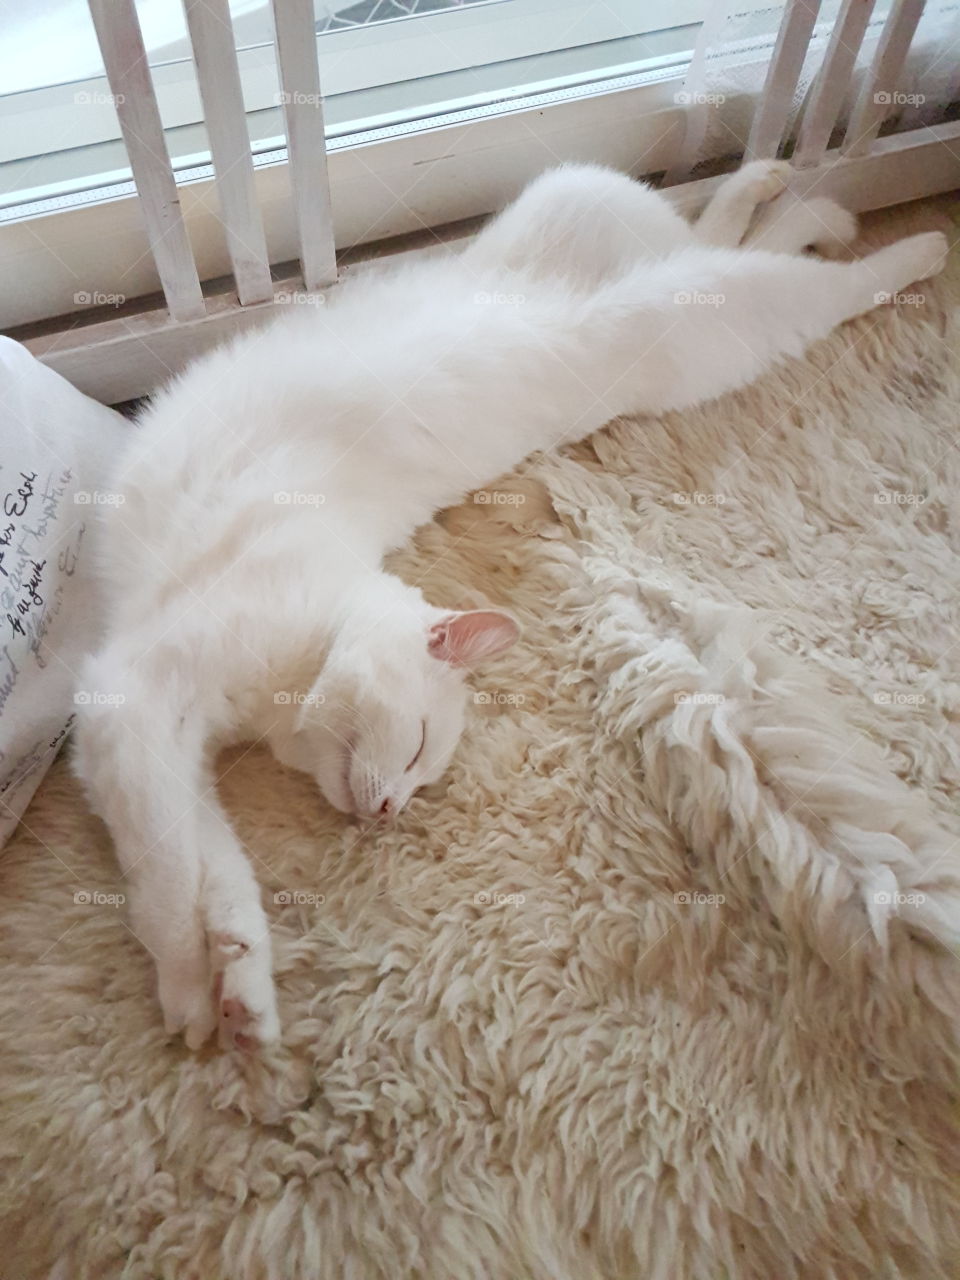 My cat is sleeping in funny pose